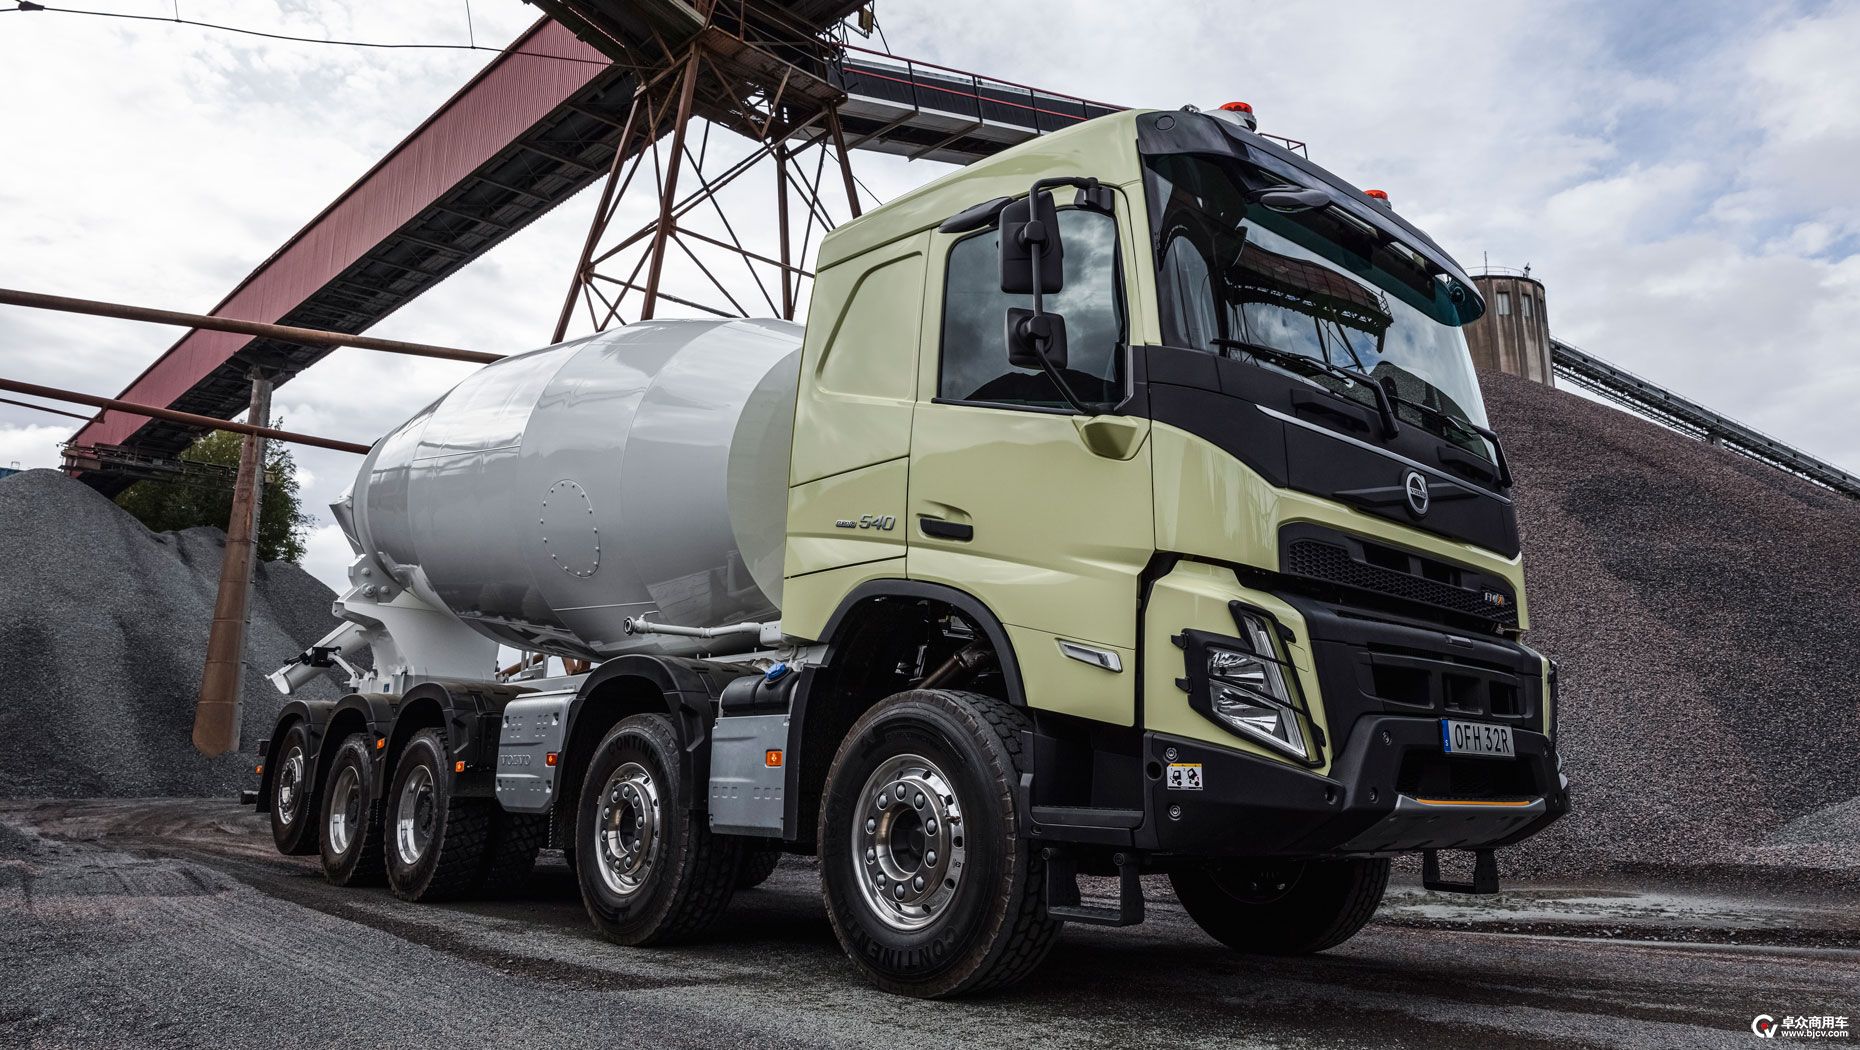 Volvo Trucks takes its most robust construction truck into the future with  the new Volvo FMX - English - 卓众商用车